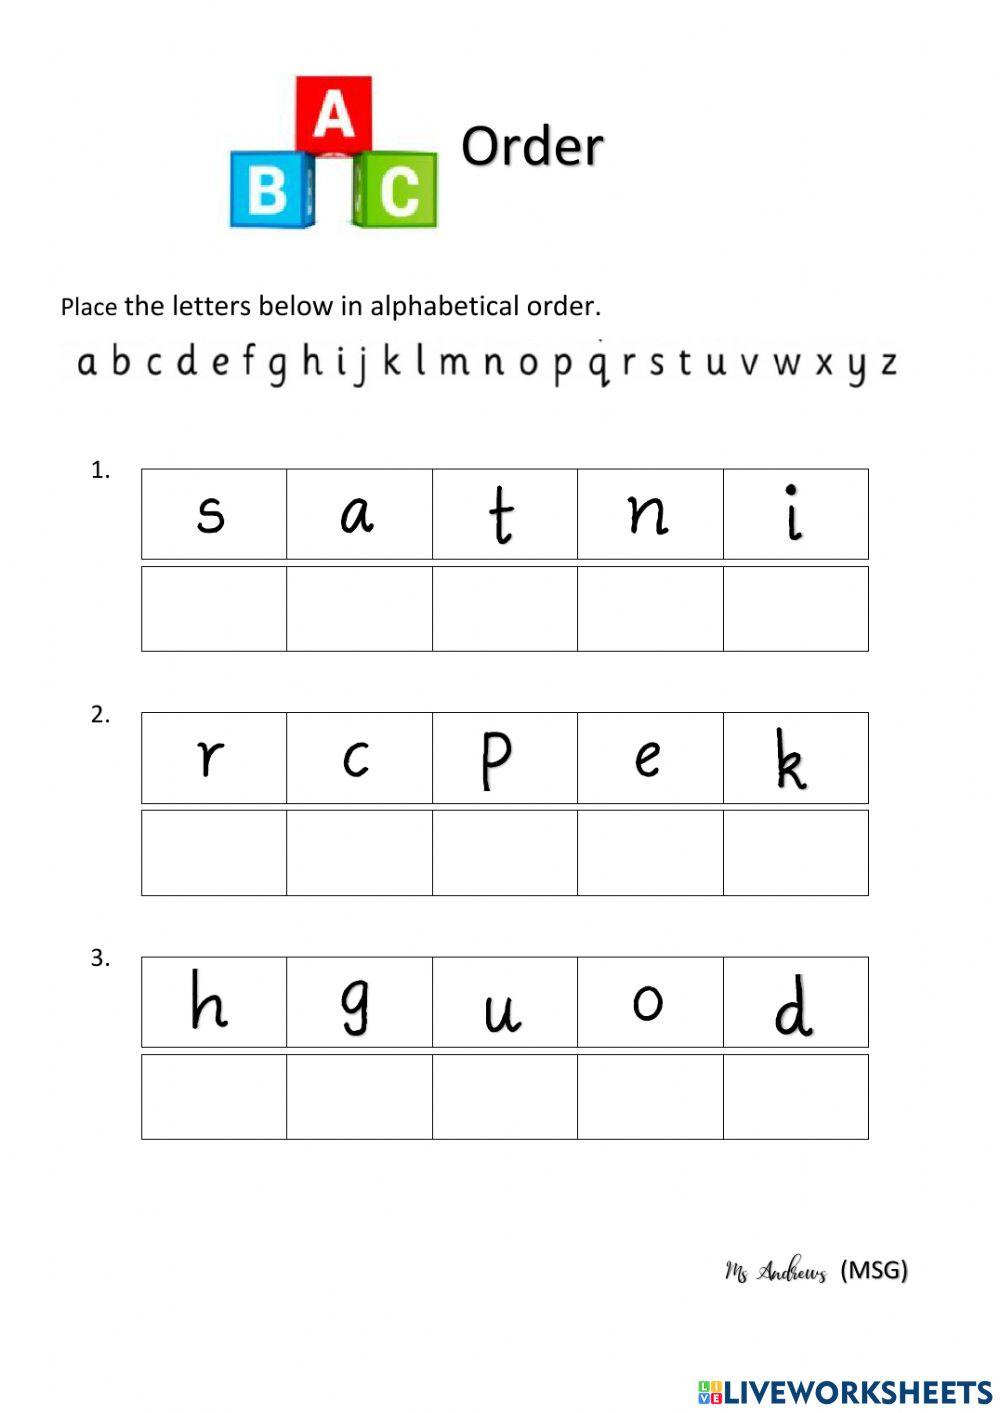 ABC Order- letters